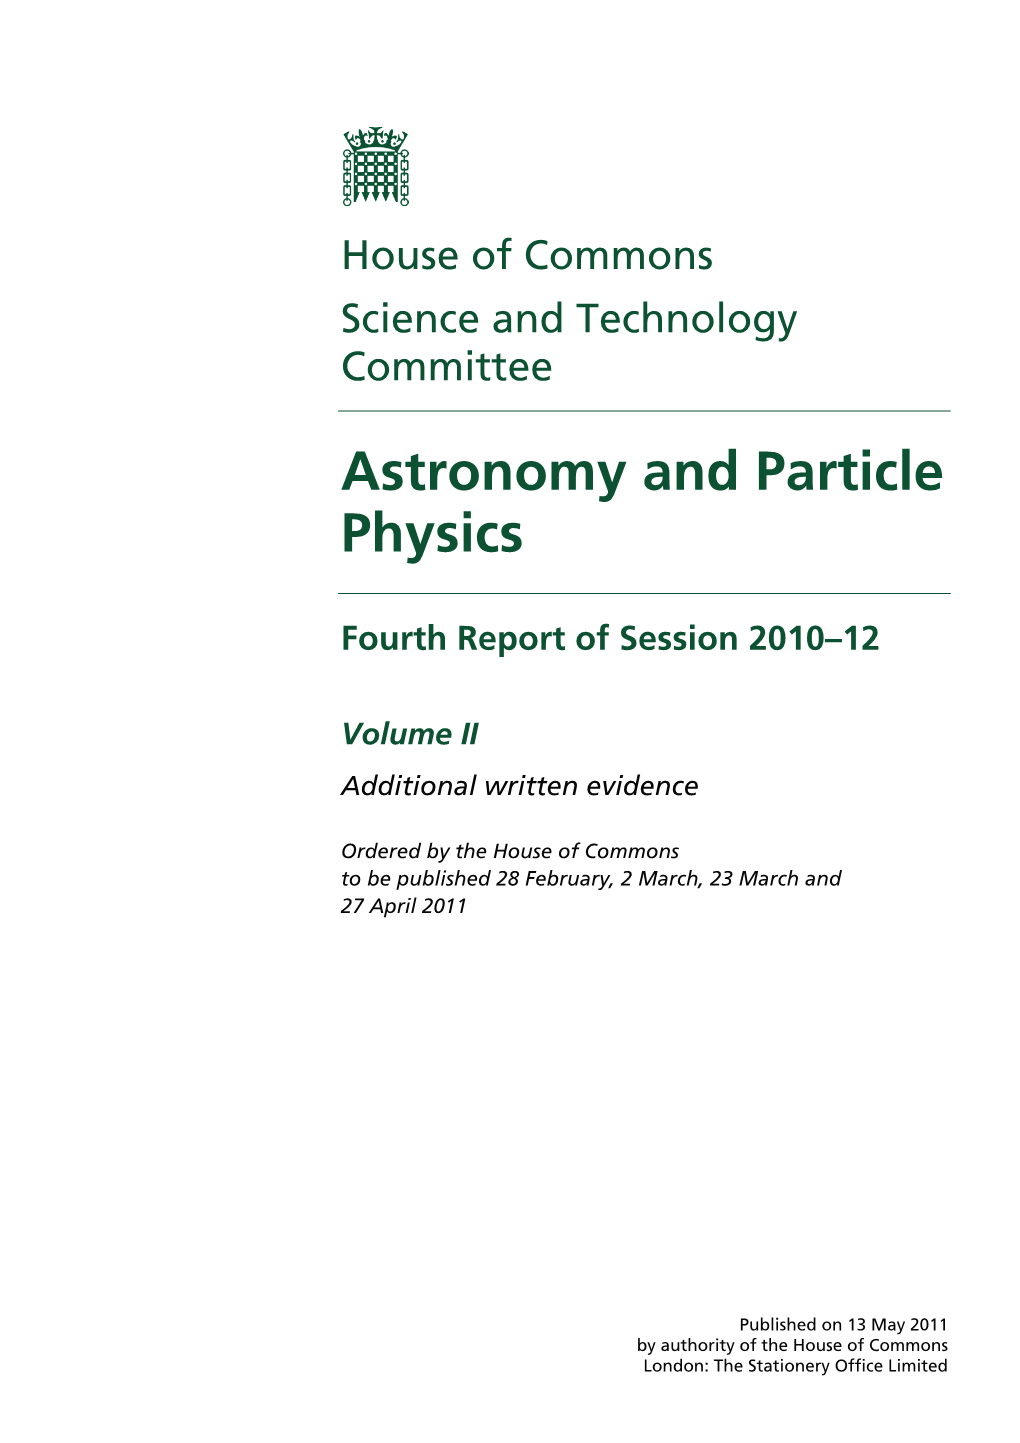 Astronomy and Particle Physics